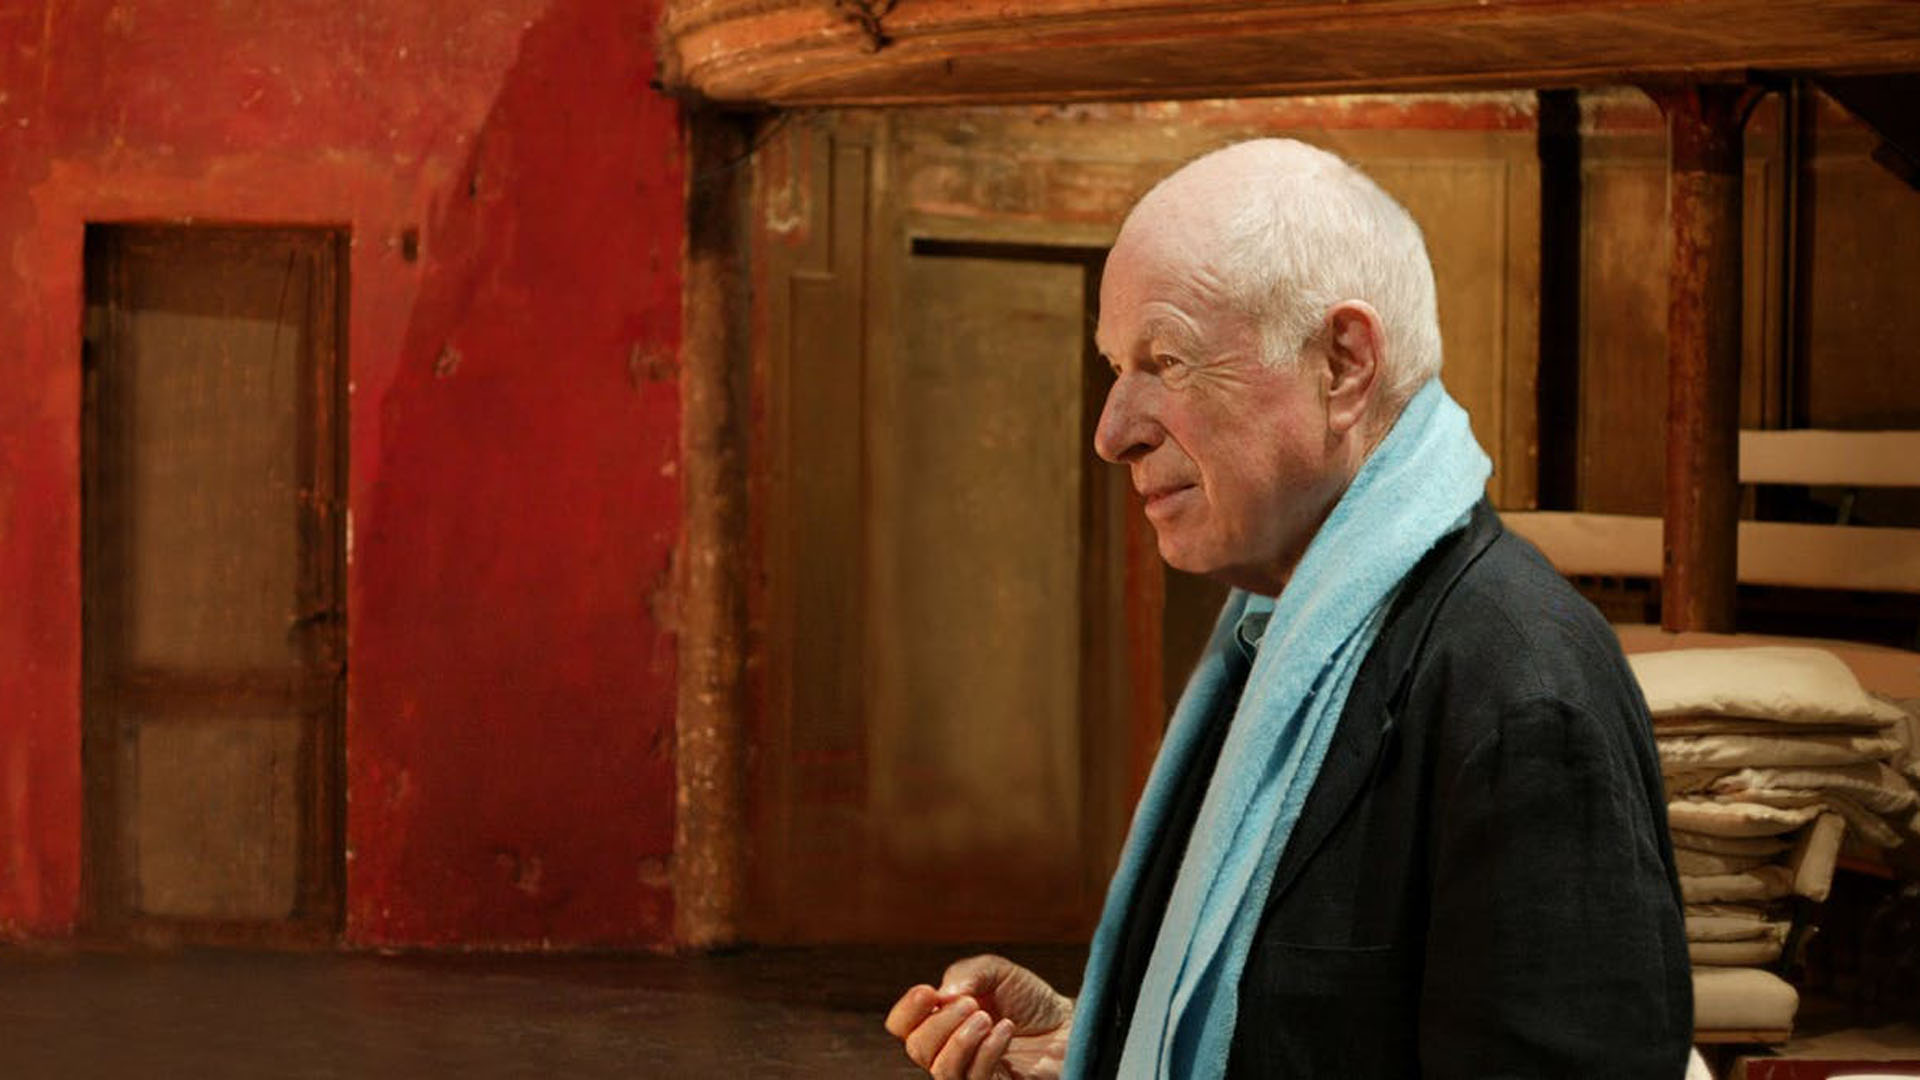 Peter Brook at the Bouffes du Nord theater in Paris (Thomas Rome/Flickr)